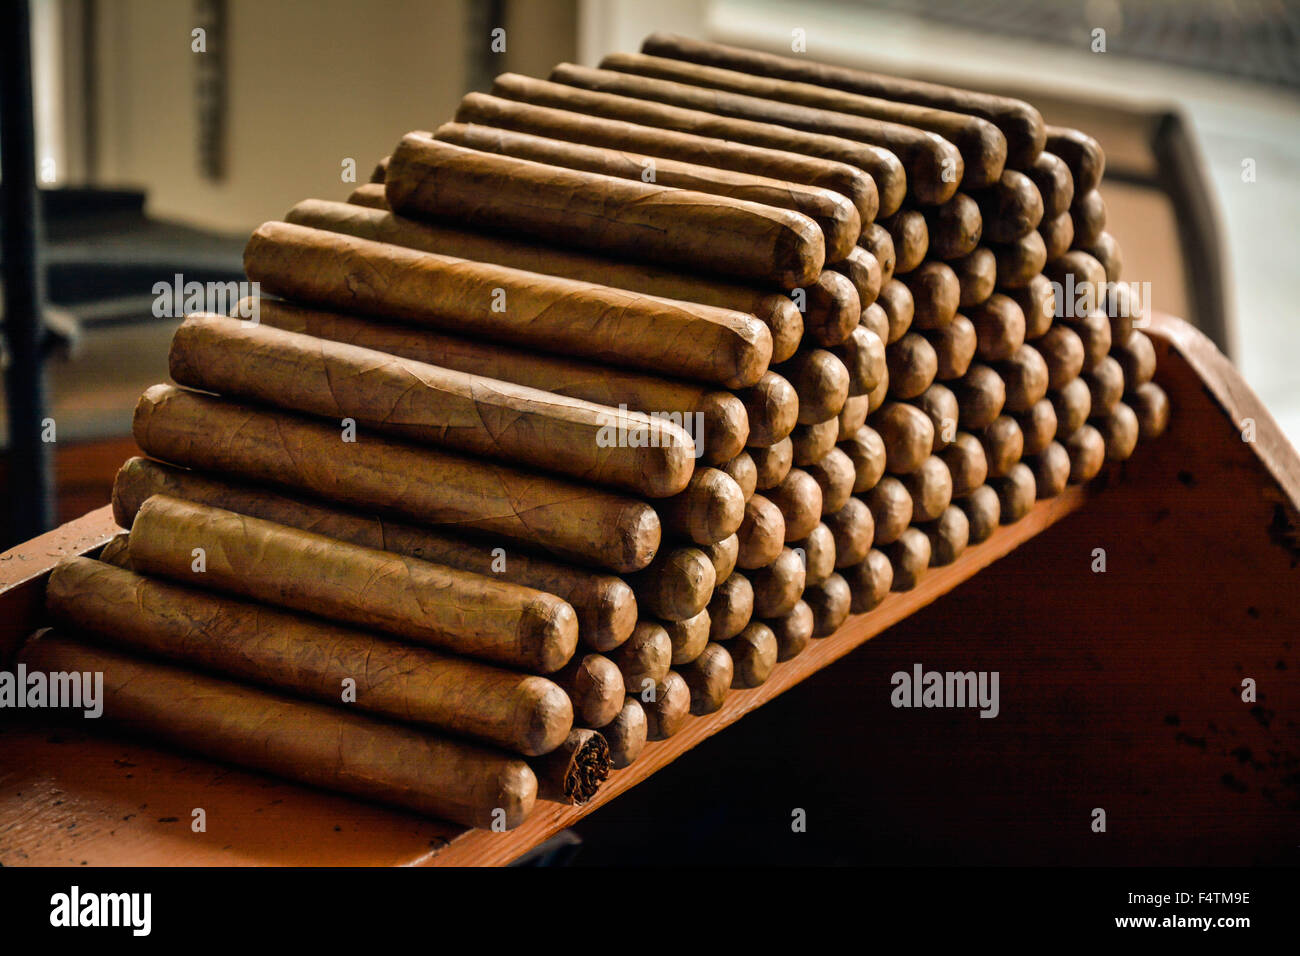 Moody, backlit and nostalgic view of Hand rolled Cuban cigars stacked in cigar factory work bench area Stock Photo